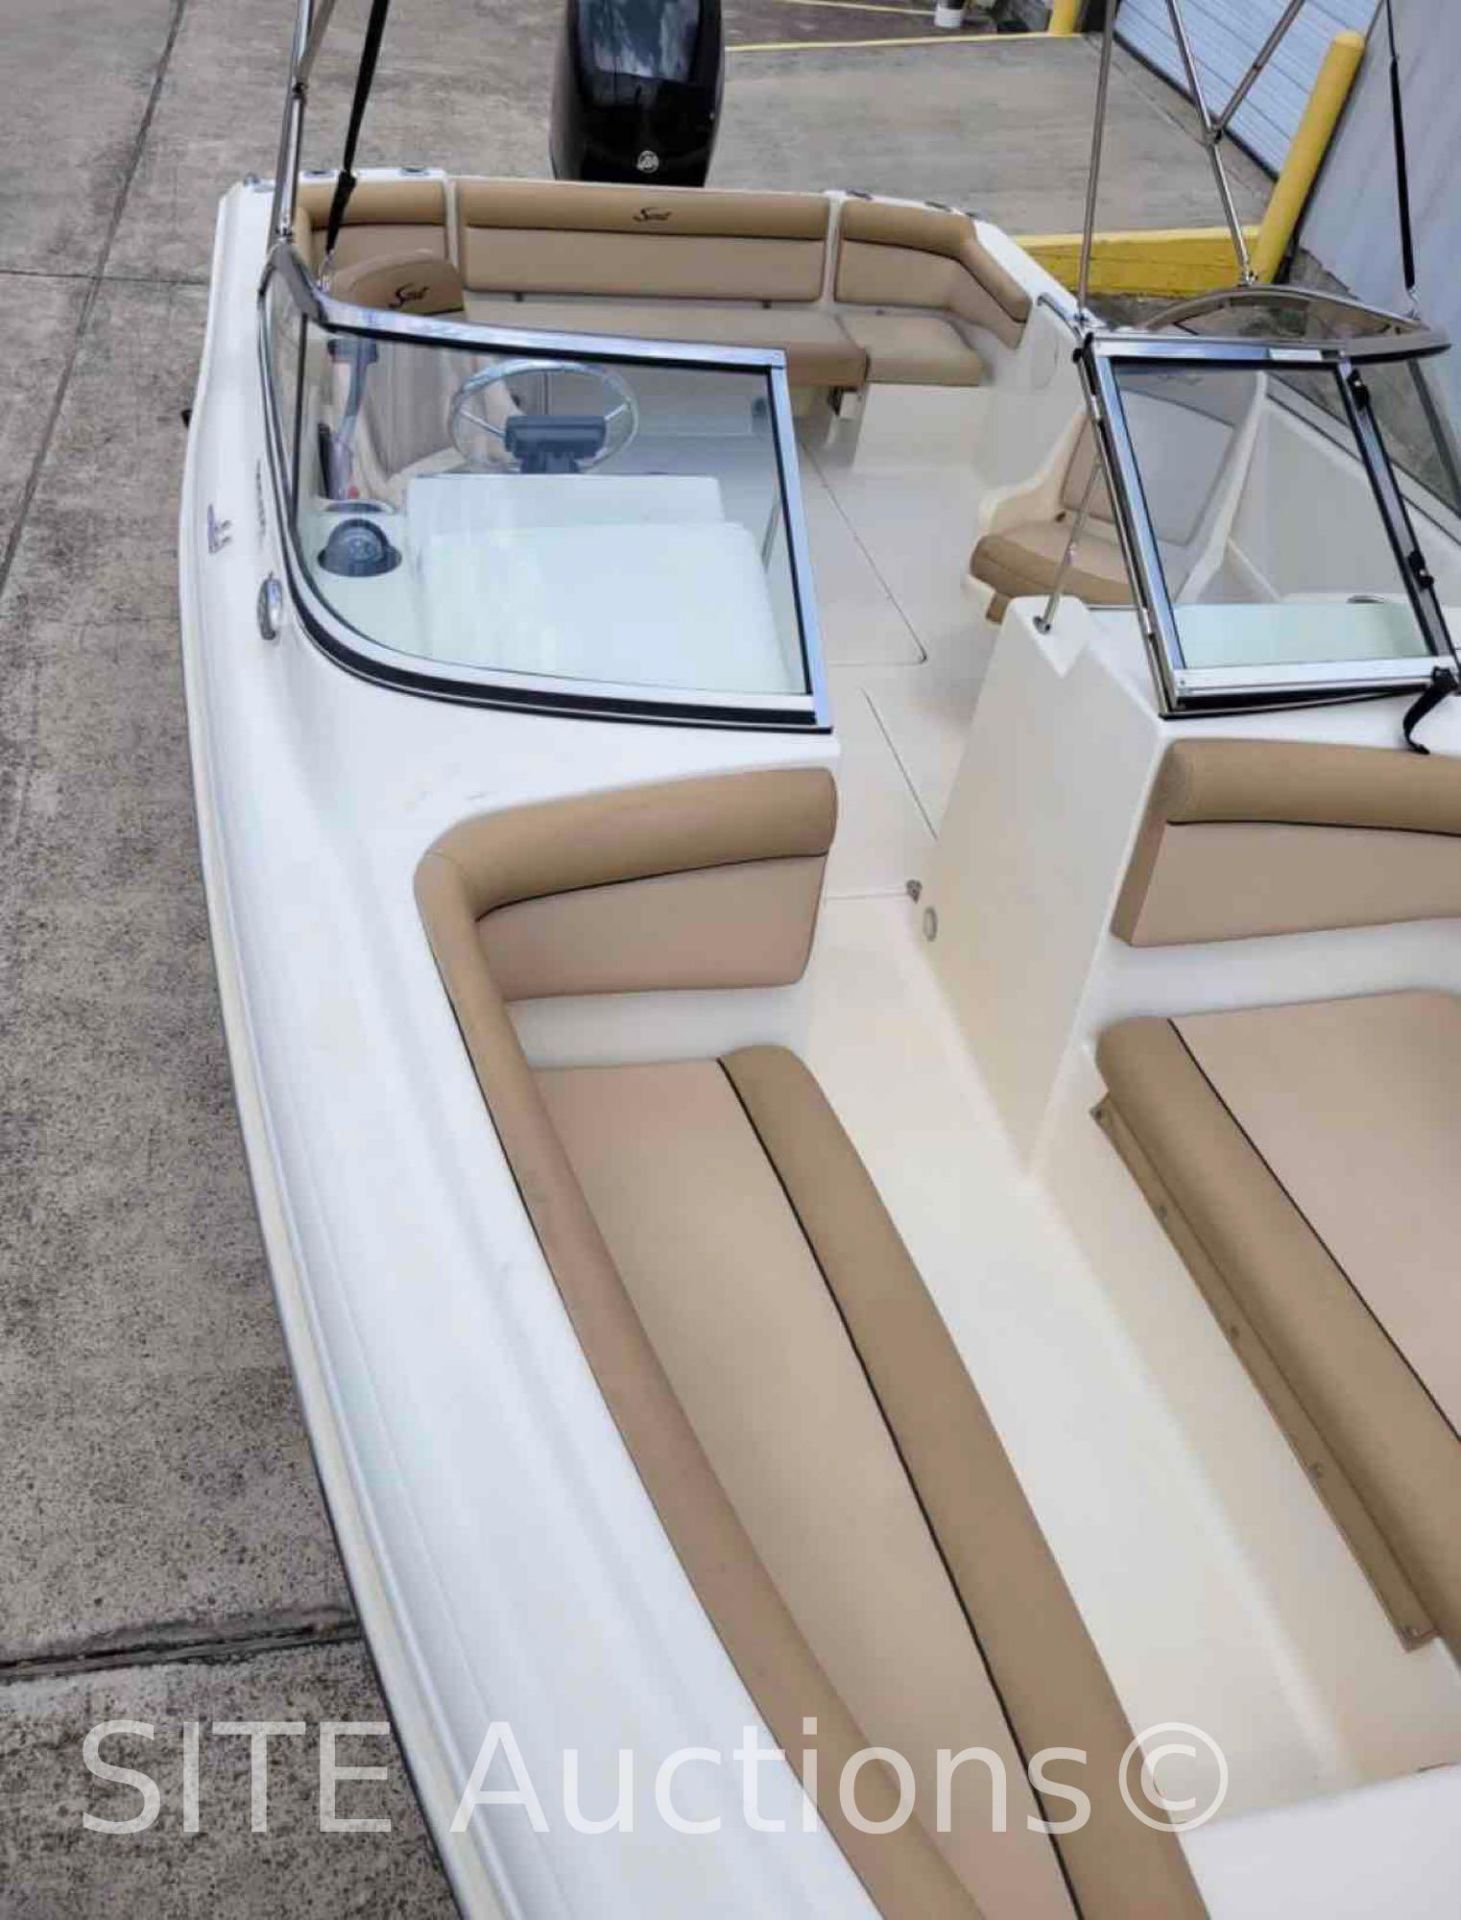 2020 Scout Dorado 20ft. Boat with Trailer - Image 18 of 21